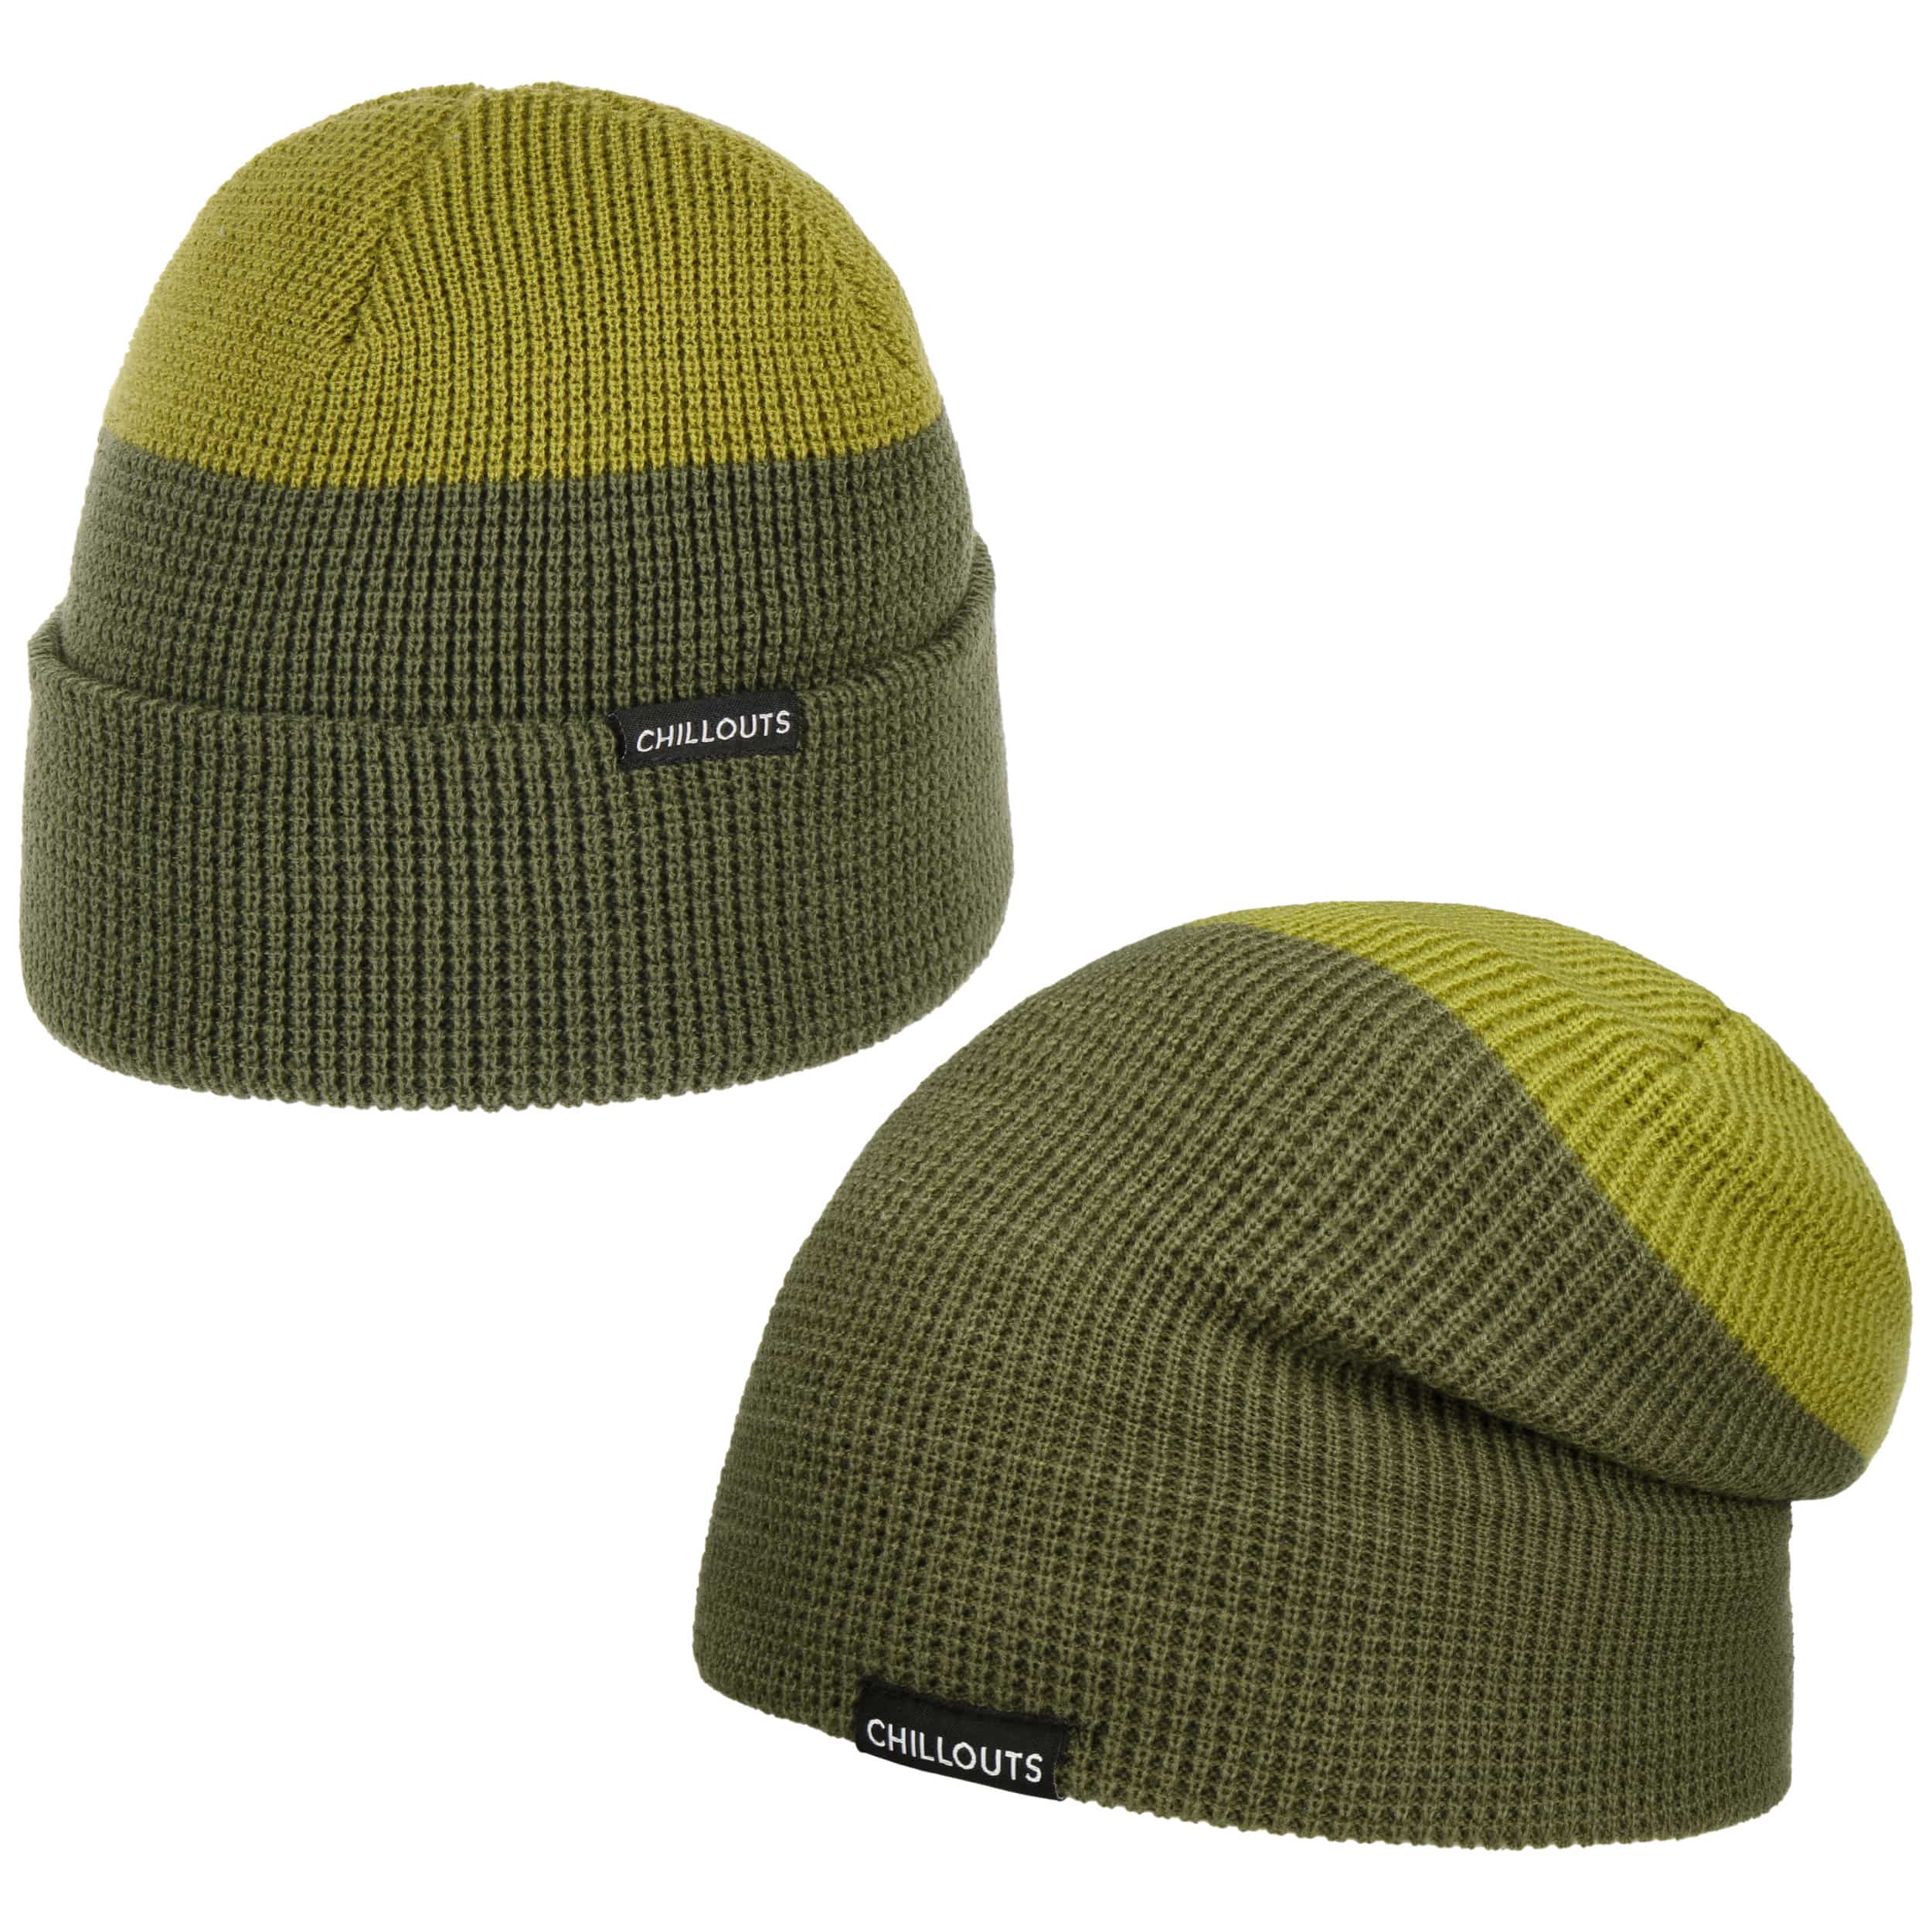 Malou Twotone 22,95 Beanie Chillouts - Hat € by